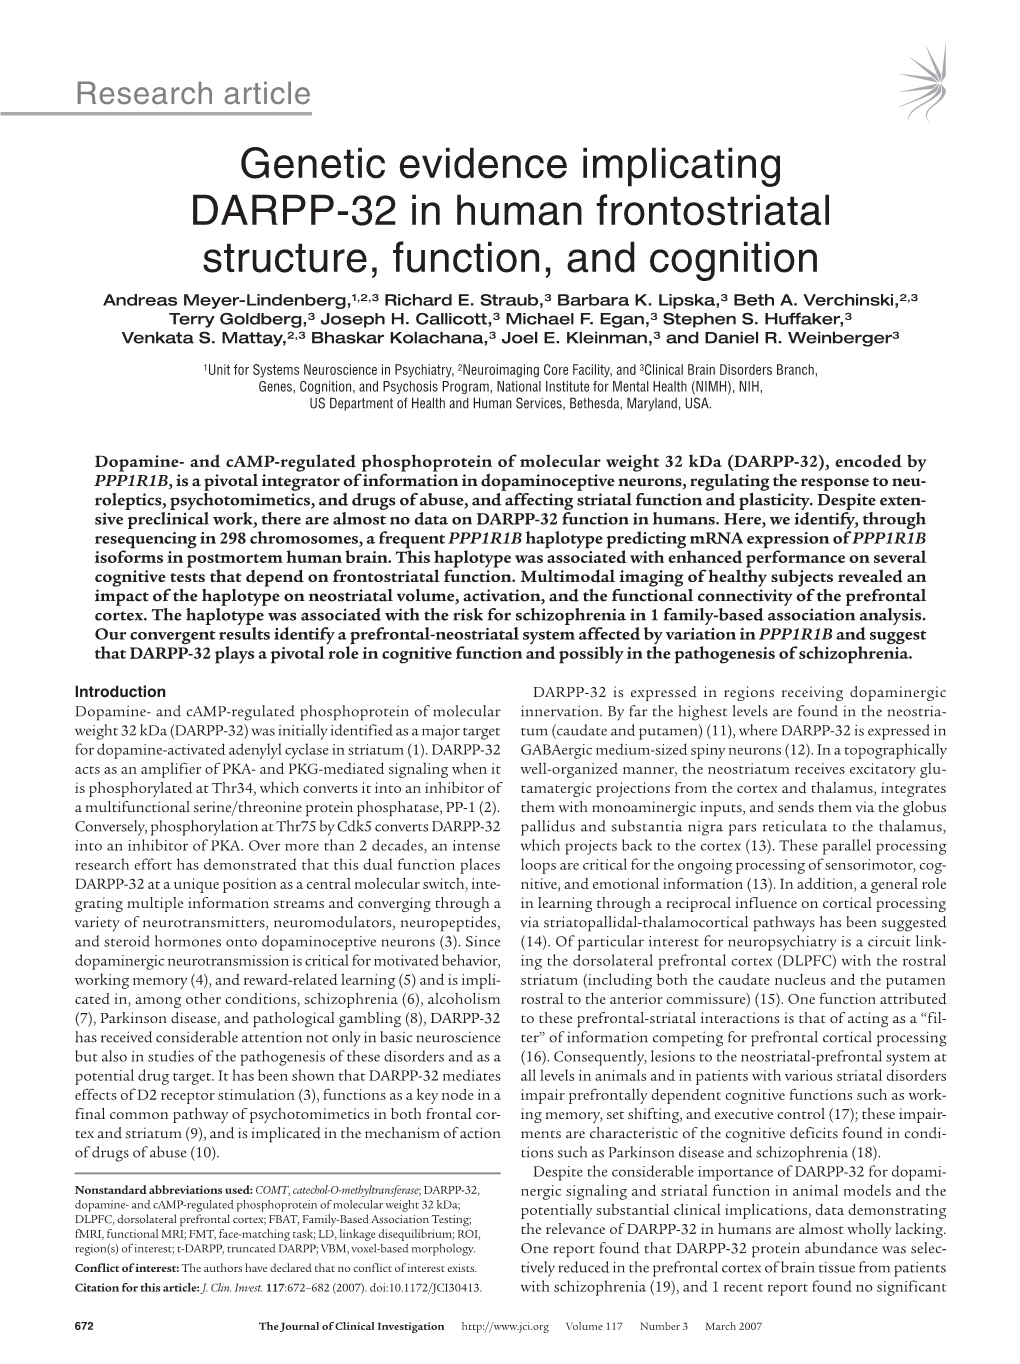 Genetic Evidence Implicating DARPP-32 in Human Frontostriatal Structure, Function, and Cognition Andreas Meyer-Lindenberg,1,2,3 Richard E